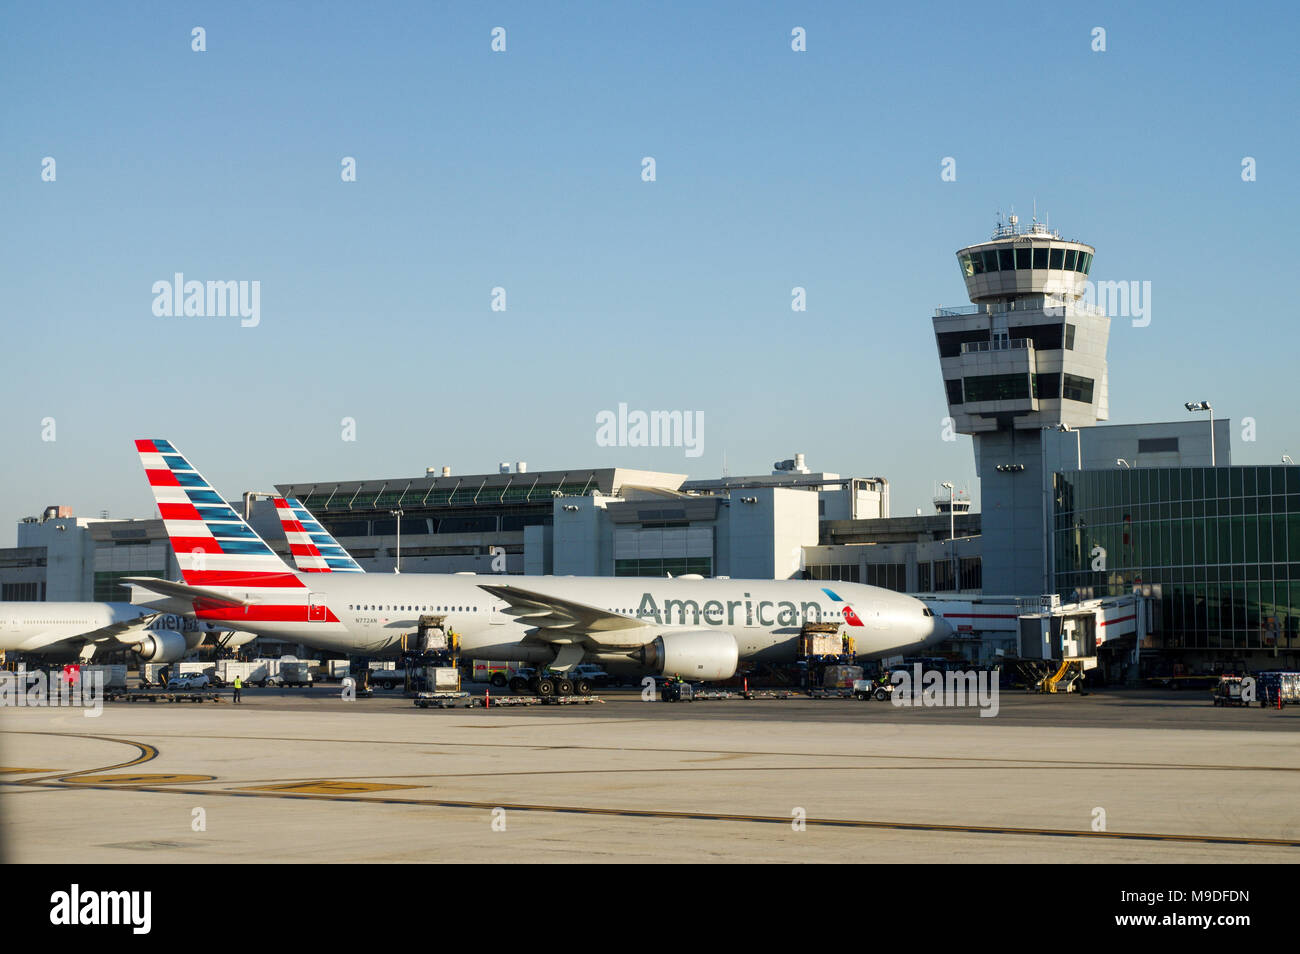 American Airlines aircraft in front of the old tower at Miami International Airport Stock Photo